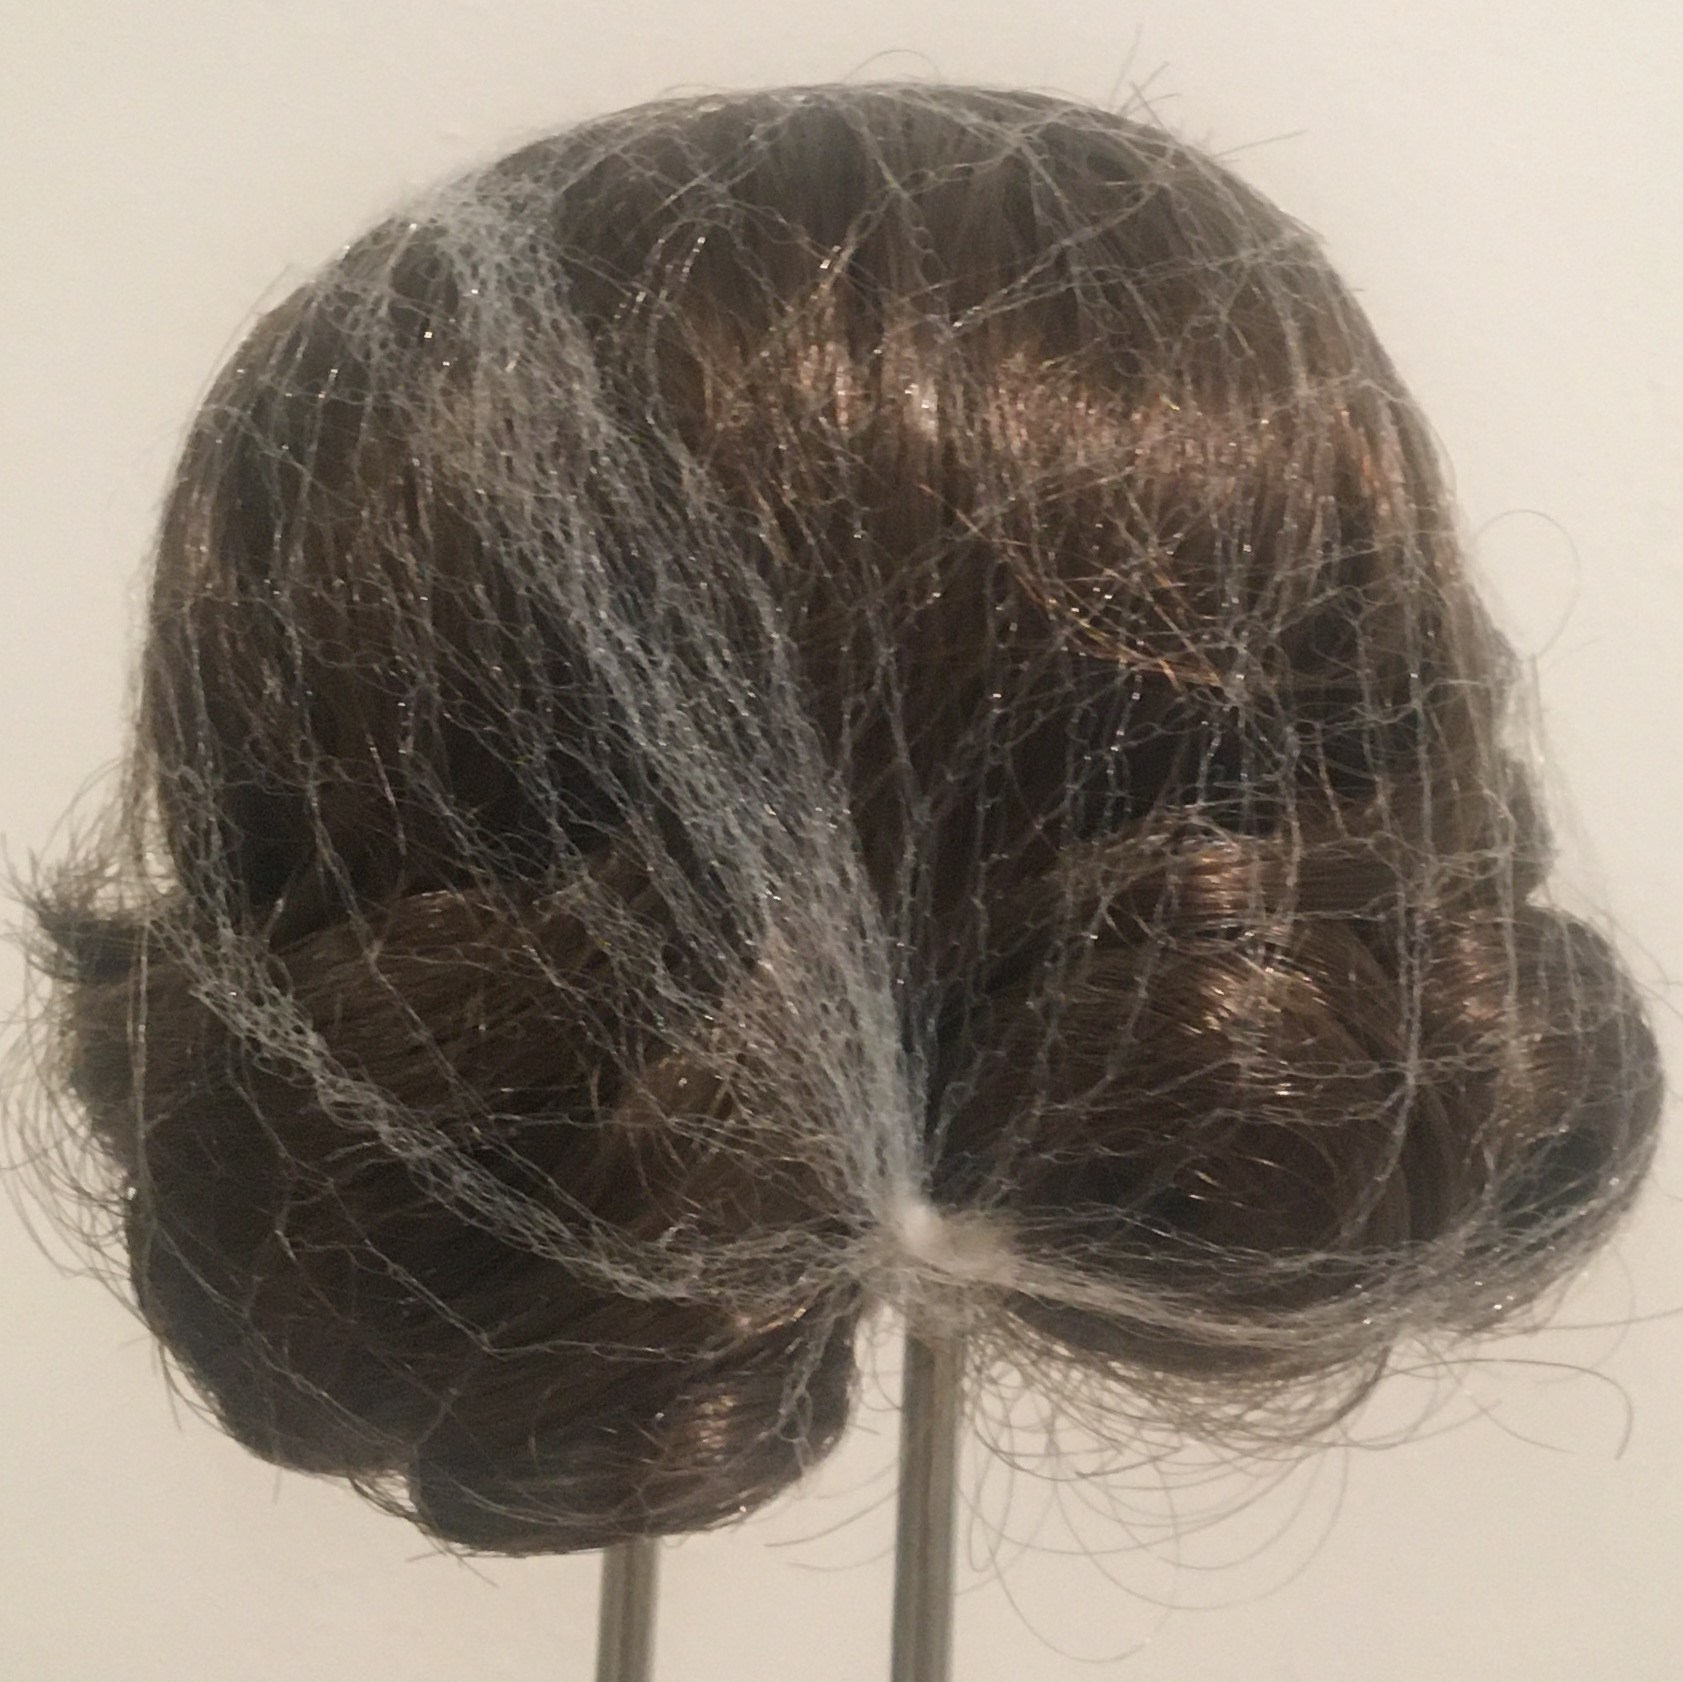 Small, dark brown wig, straight with curled ends, contained in a hair net